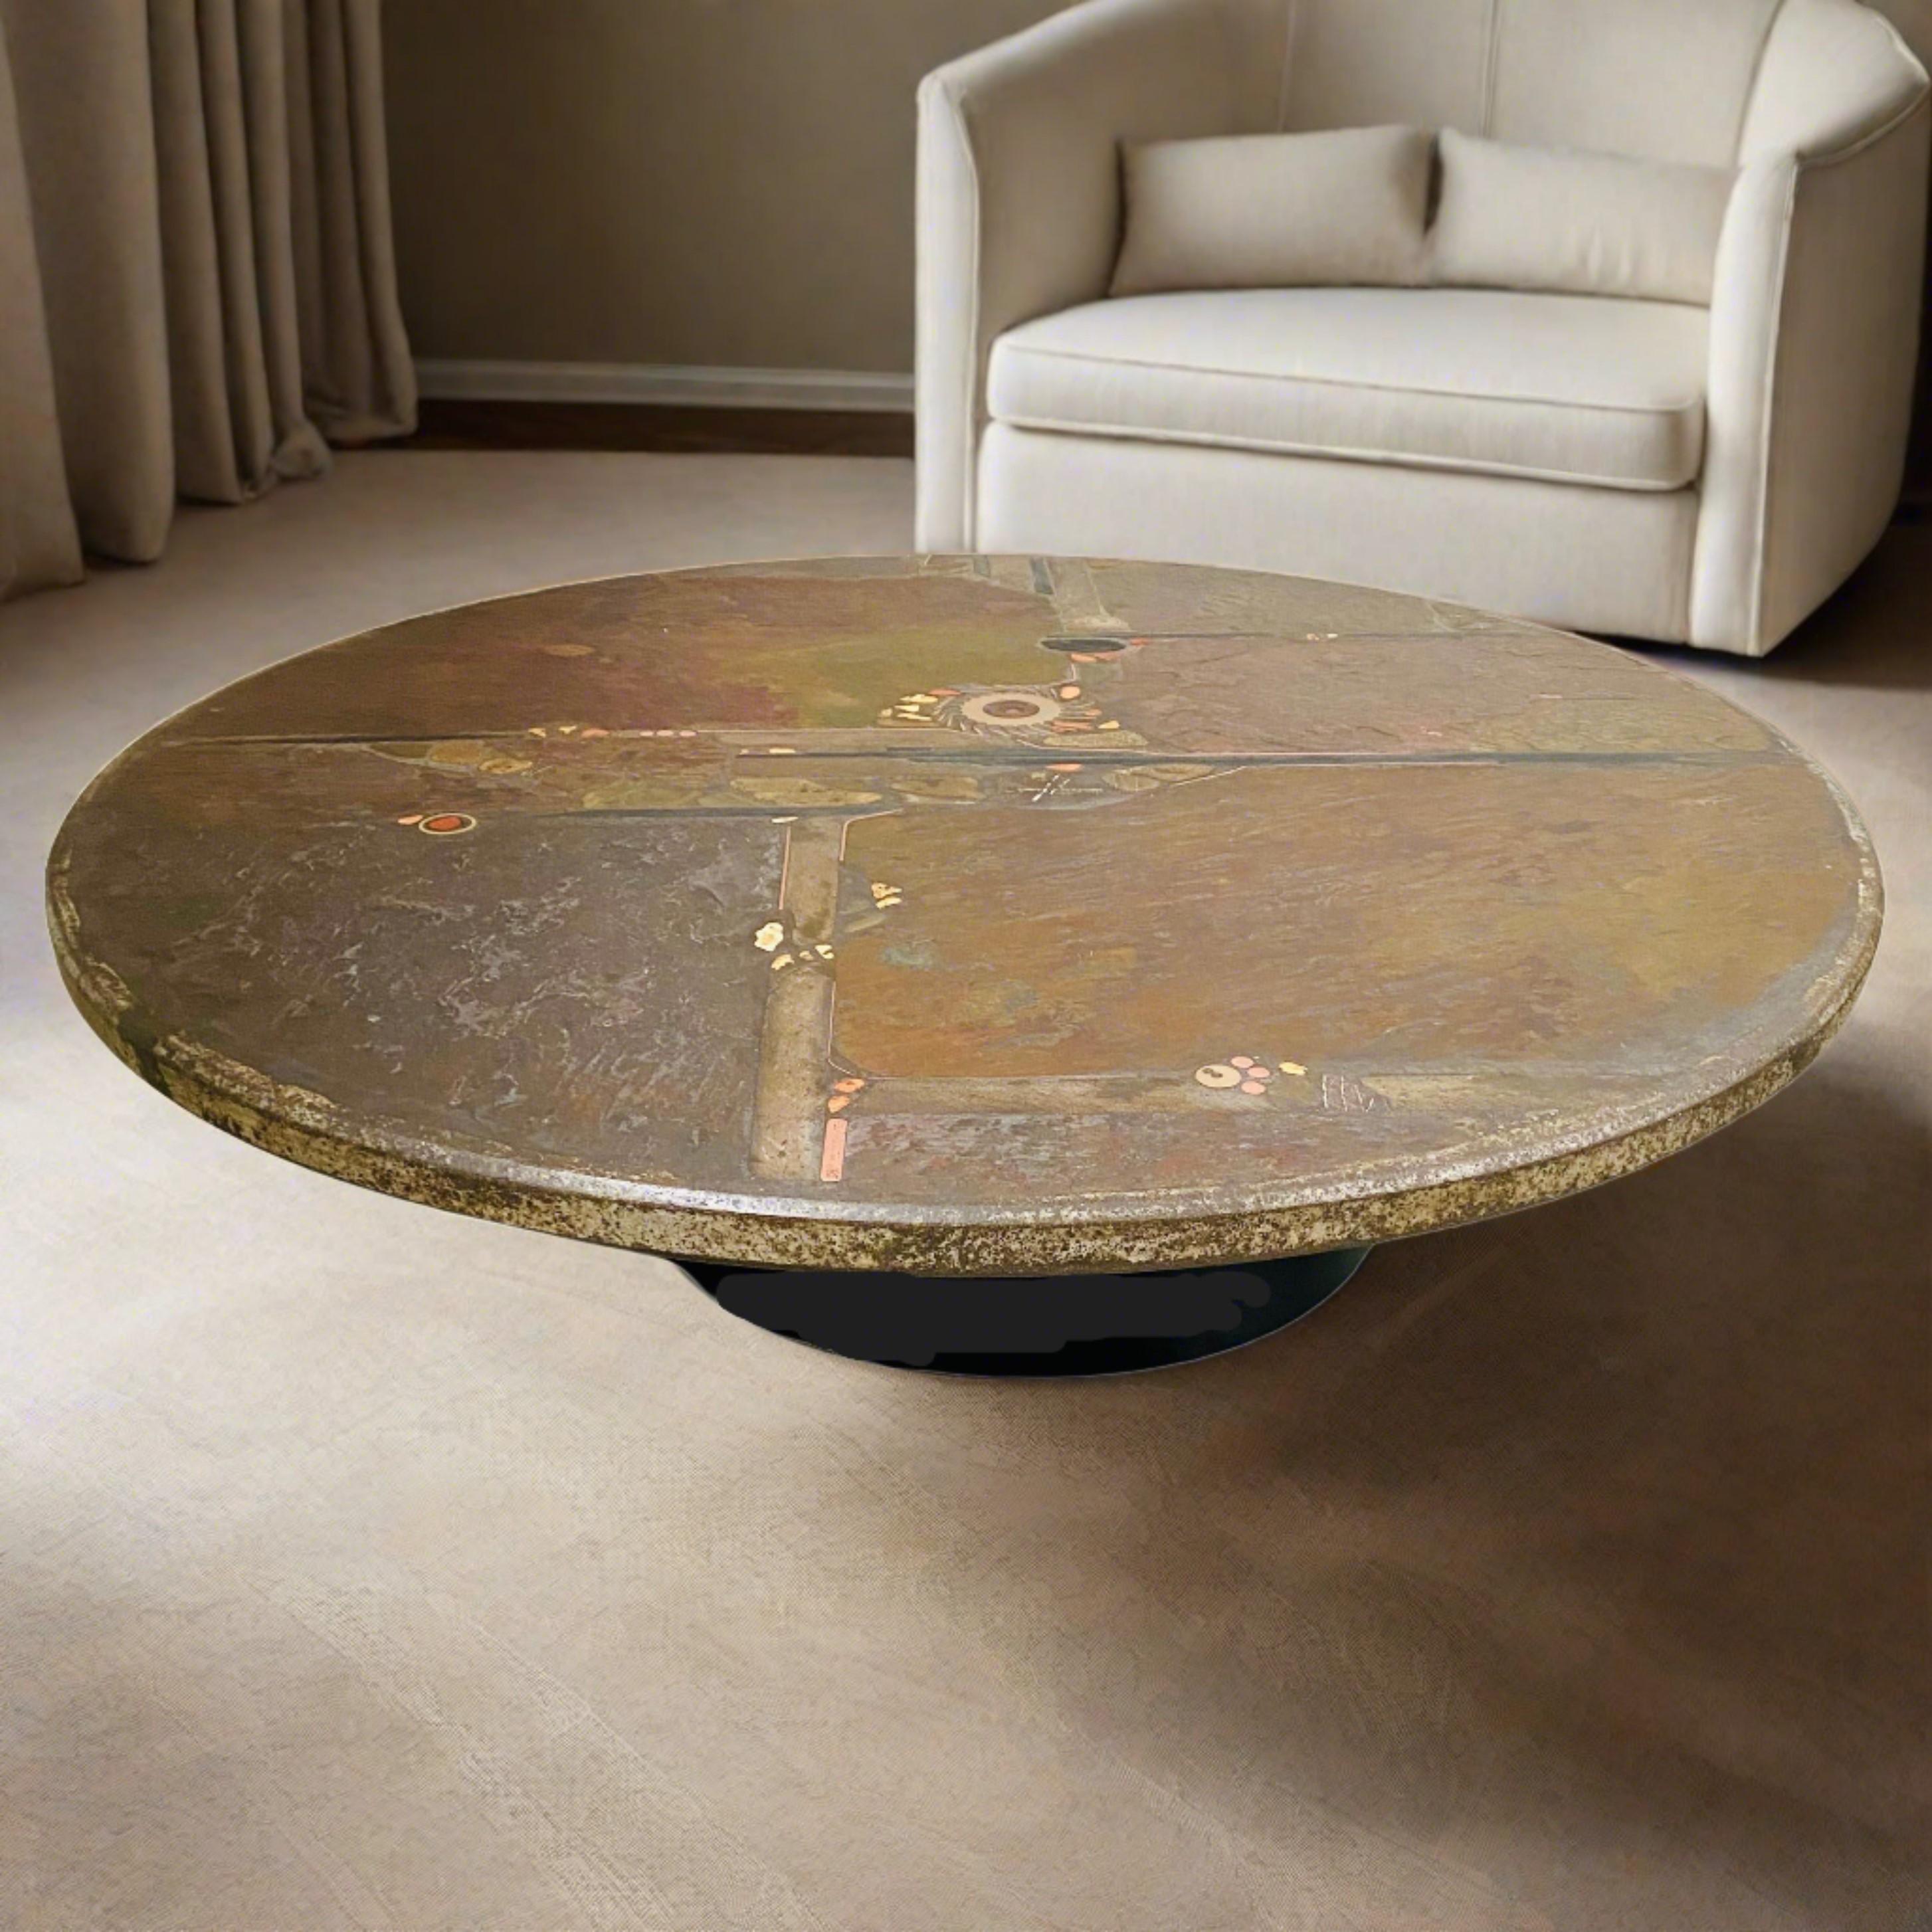 Brutalist Art Stone Round Coffee Table by Sculptor Paul Kingma Netherlands, 1985 In Good Condition For Sale In DE MEERN, NL